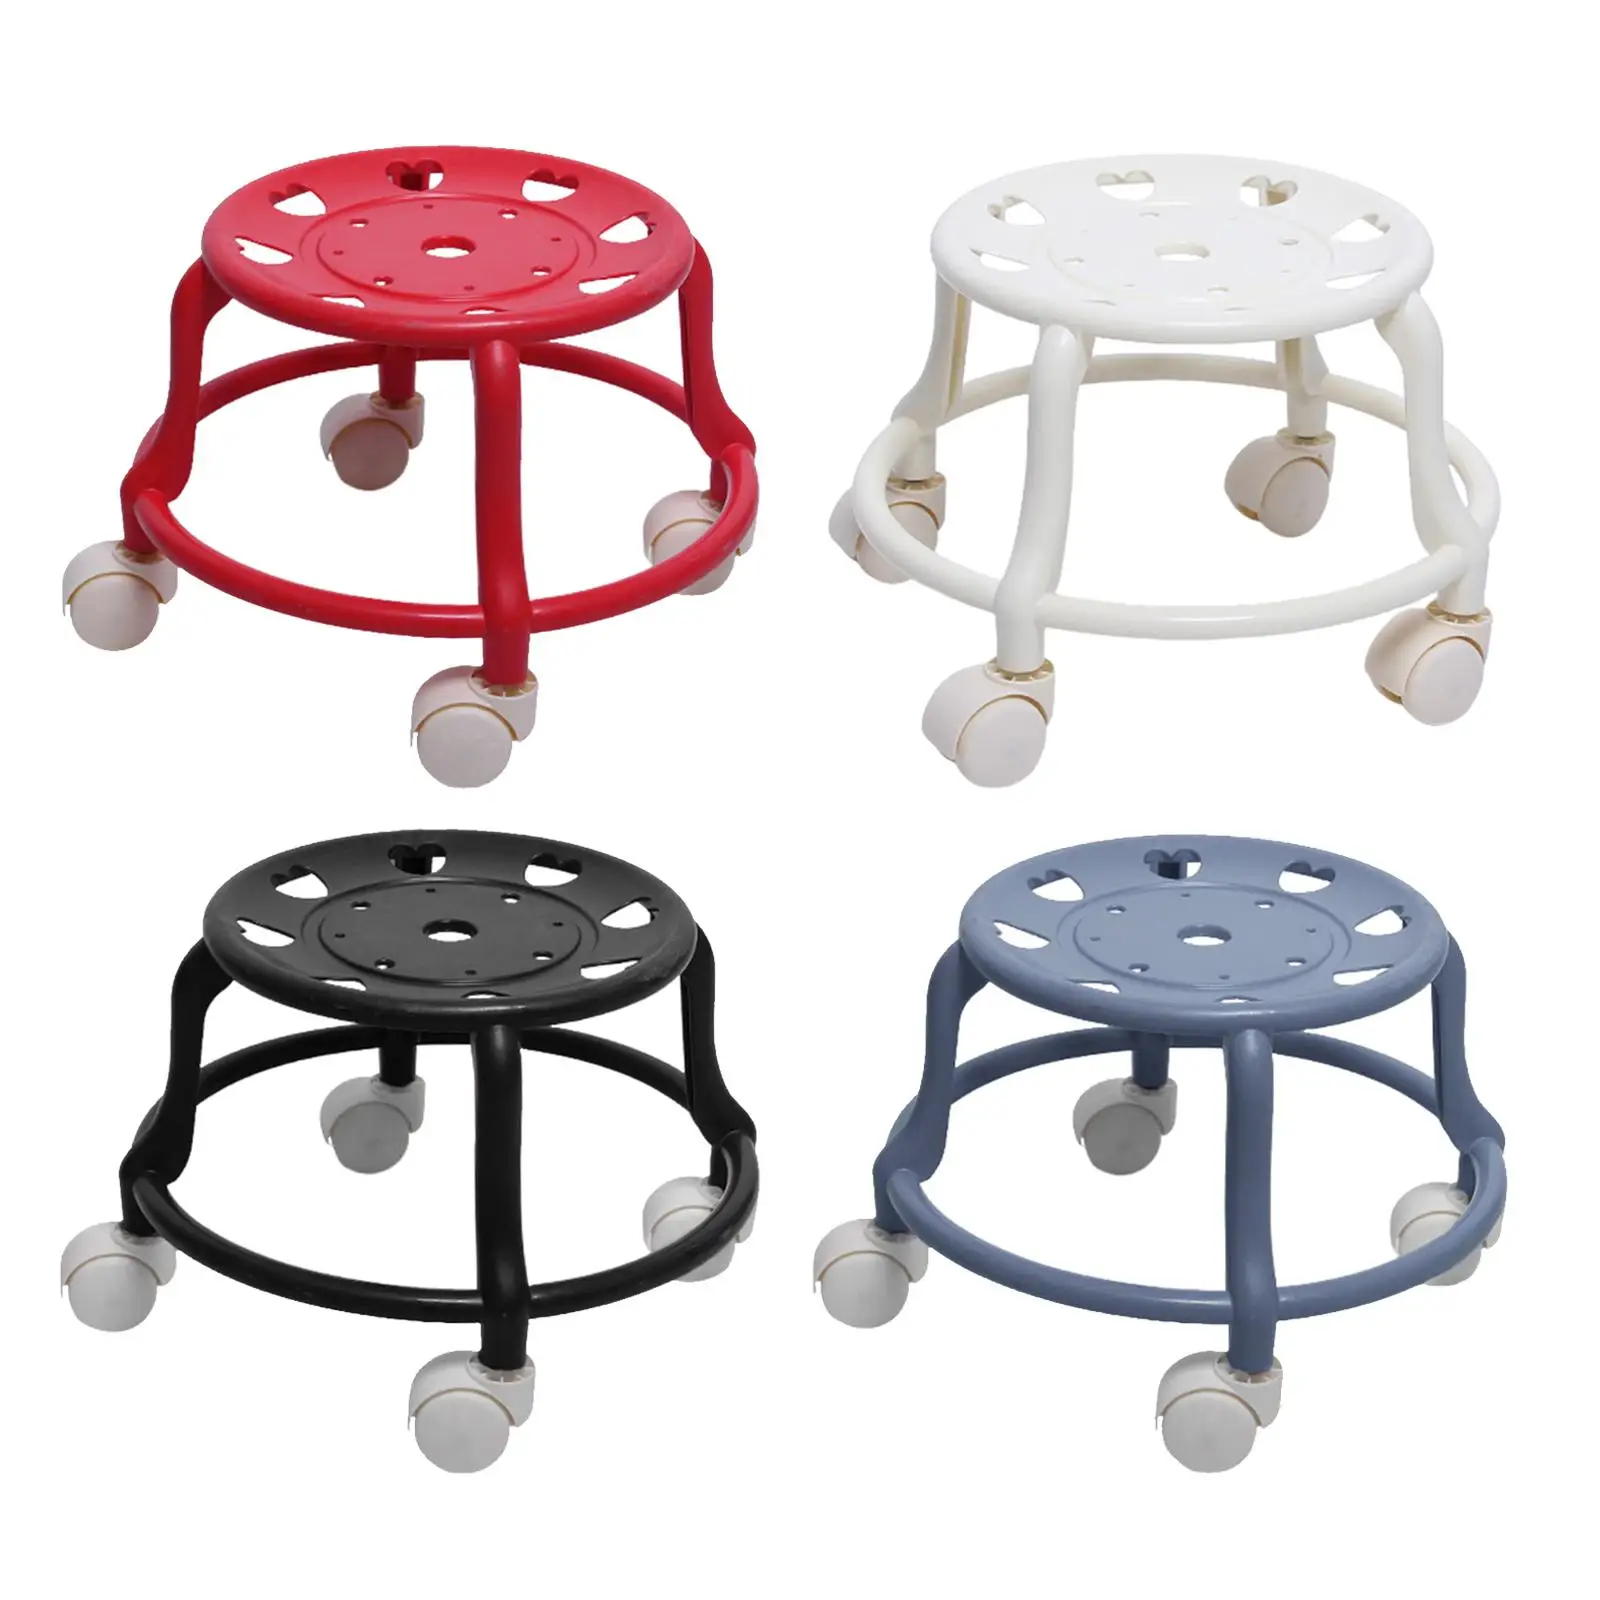 Low Roller Stool Heavy Loading Comfortable Planter Stand Universal Swivel Casters Pulley Stools for Kids and Adults Fitness